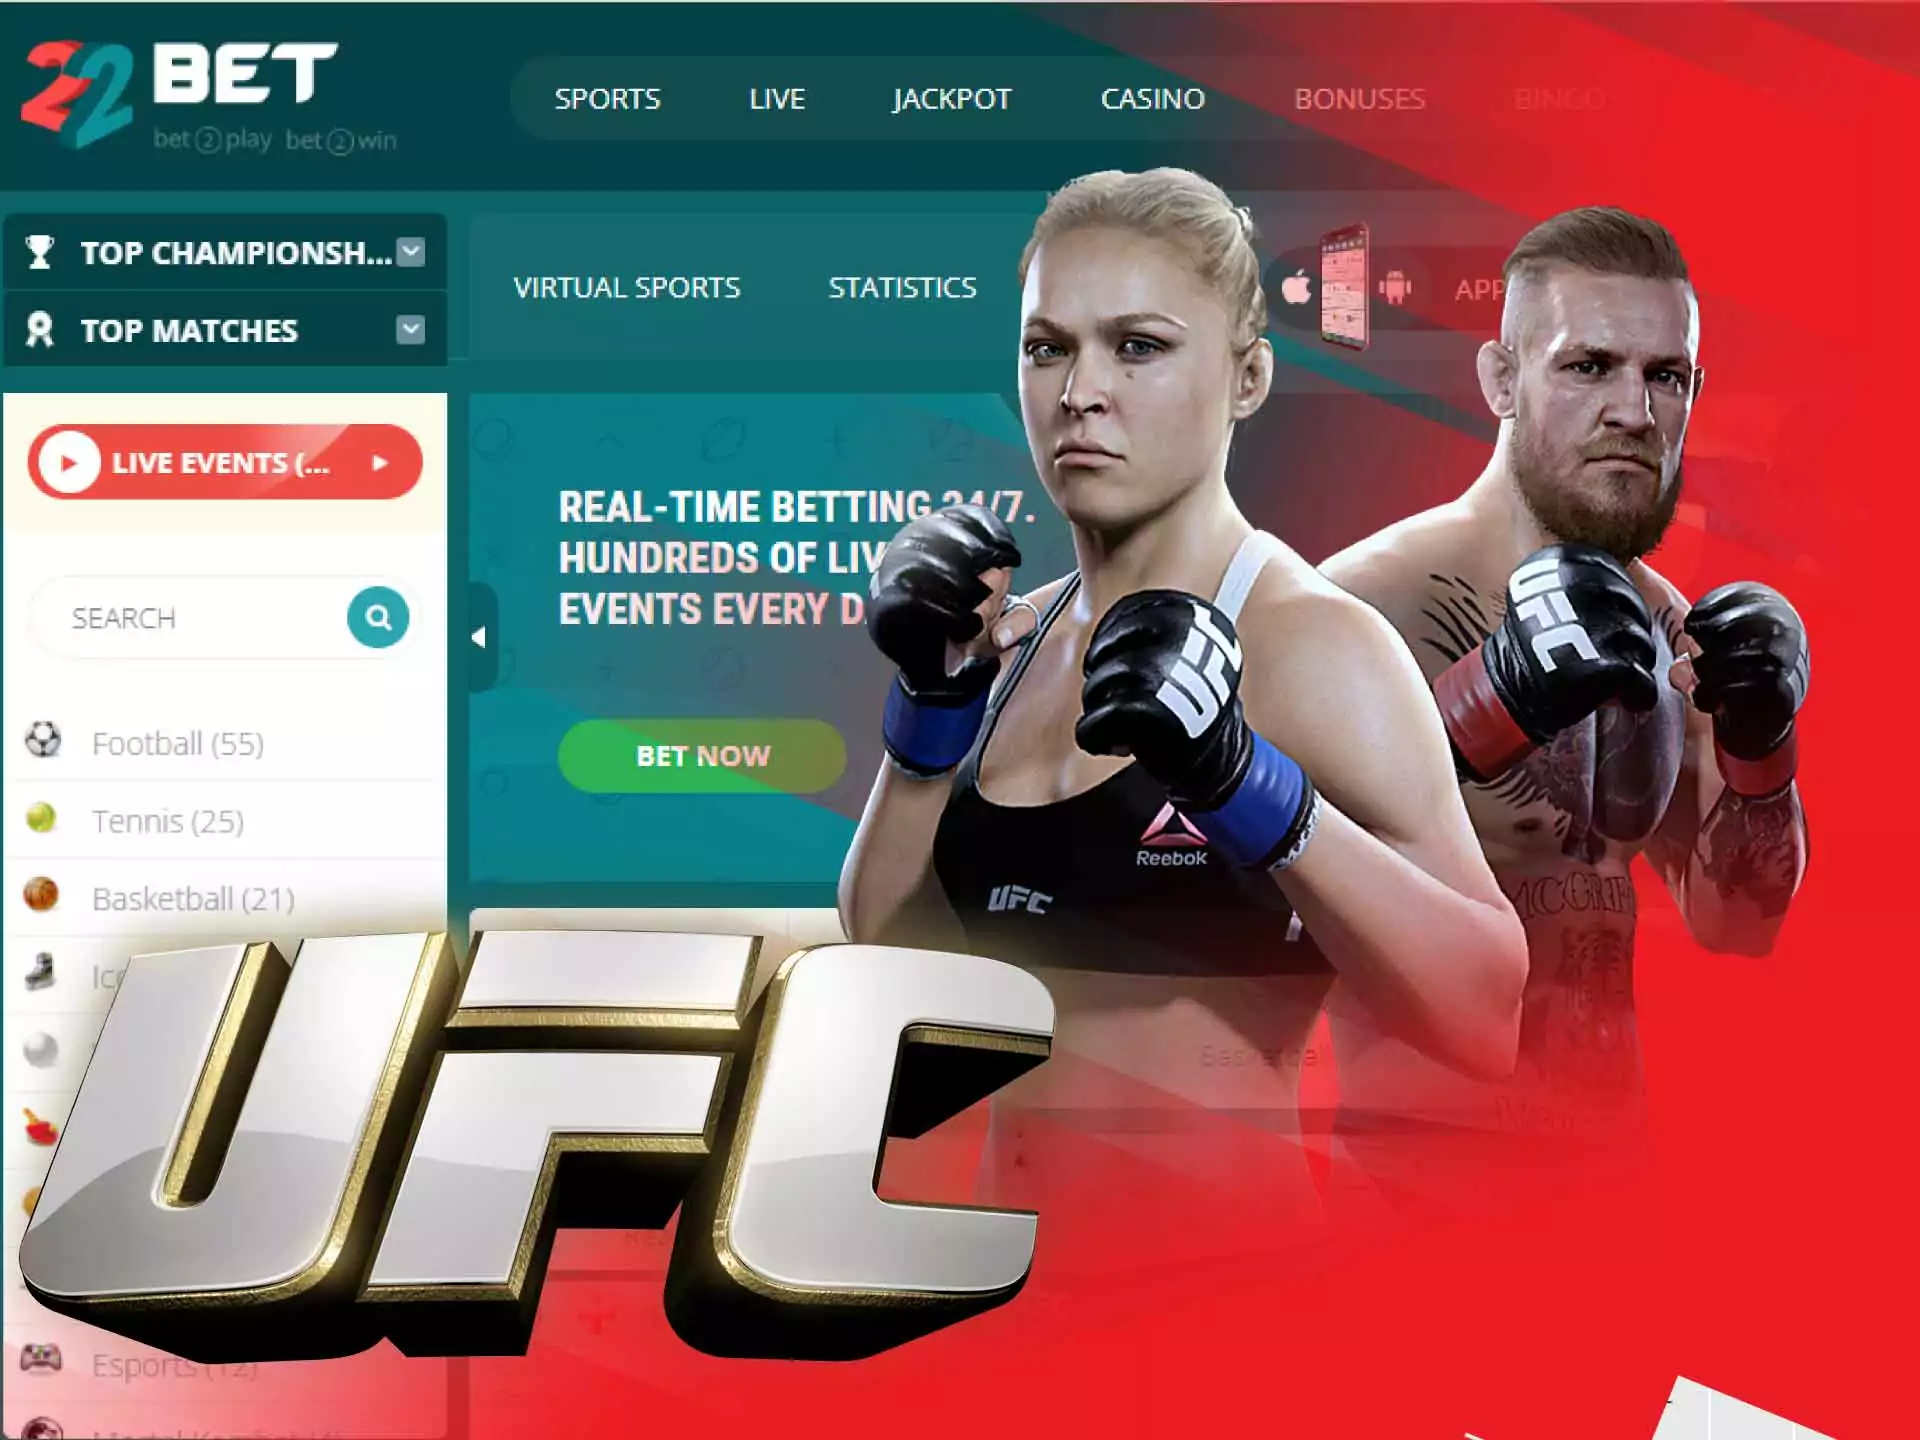 Choose your favorite UFC fighter and place bet on his win.